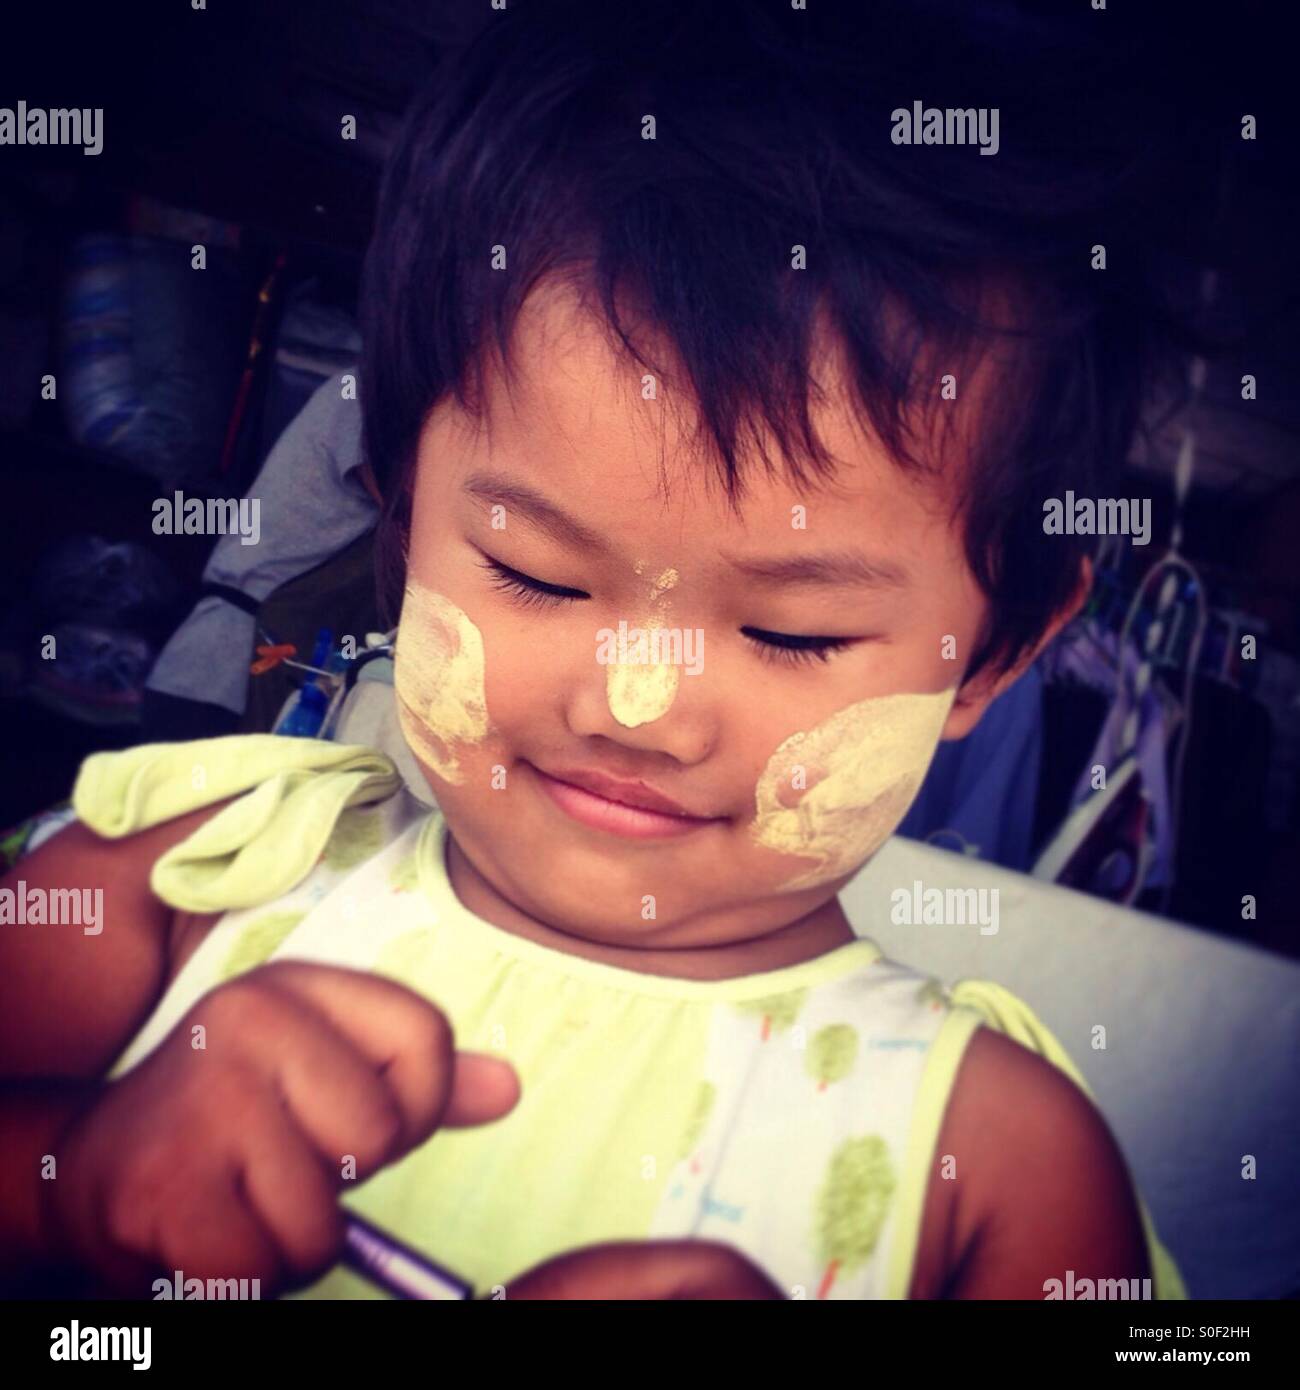 Toddler with sun protection on cheeks and nose, Thailand Stock Photo